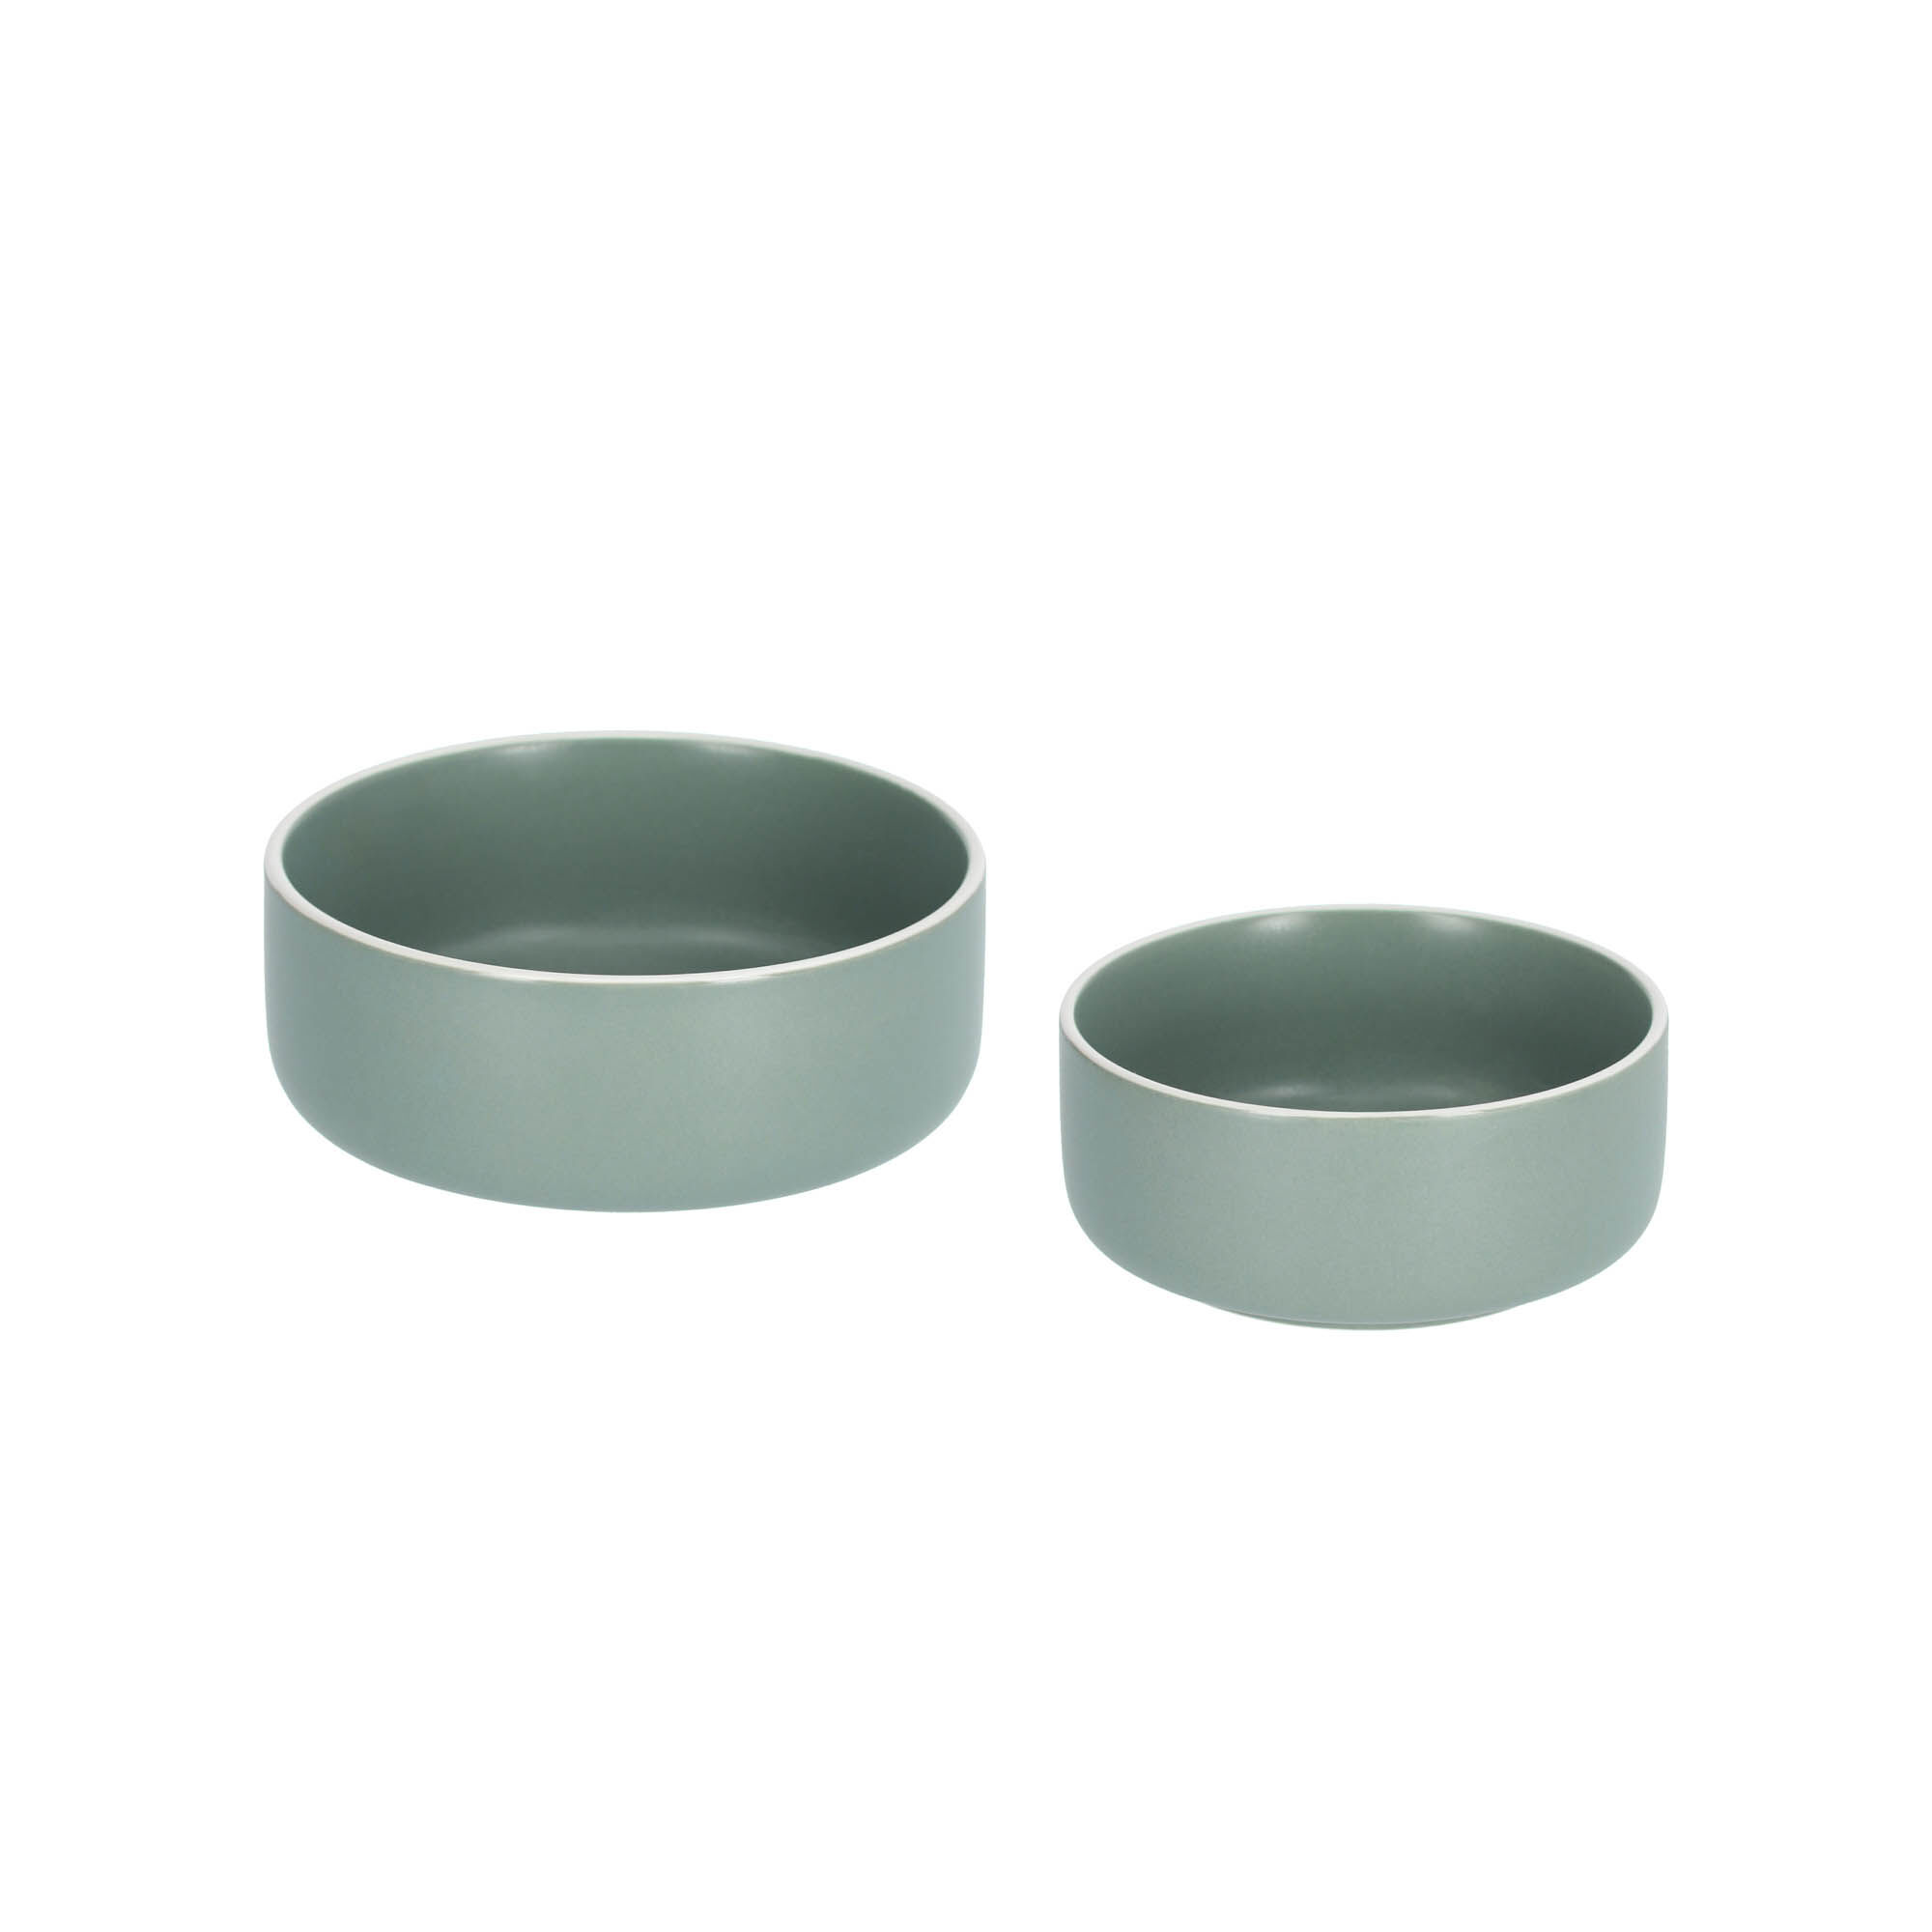 Kave Home Set of large and small Shun bowls in green porcelain